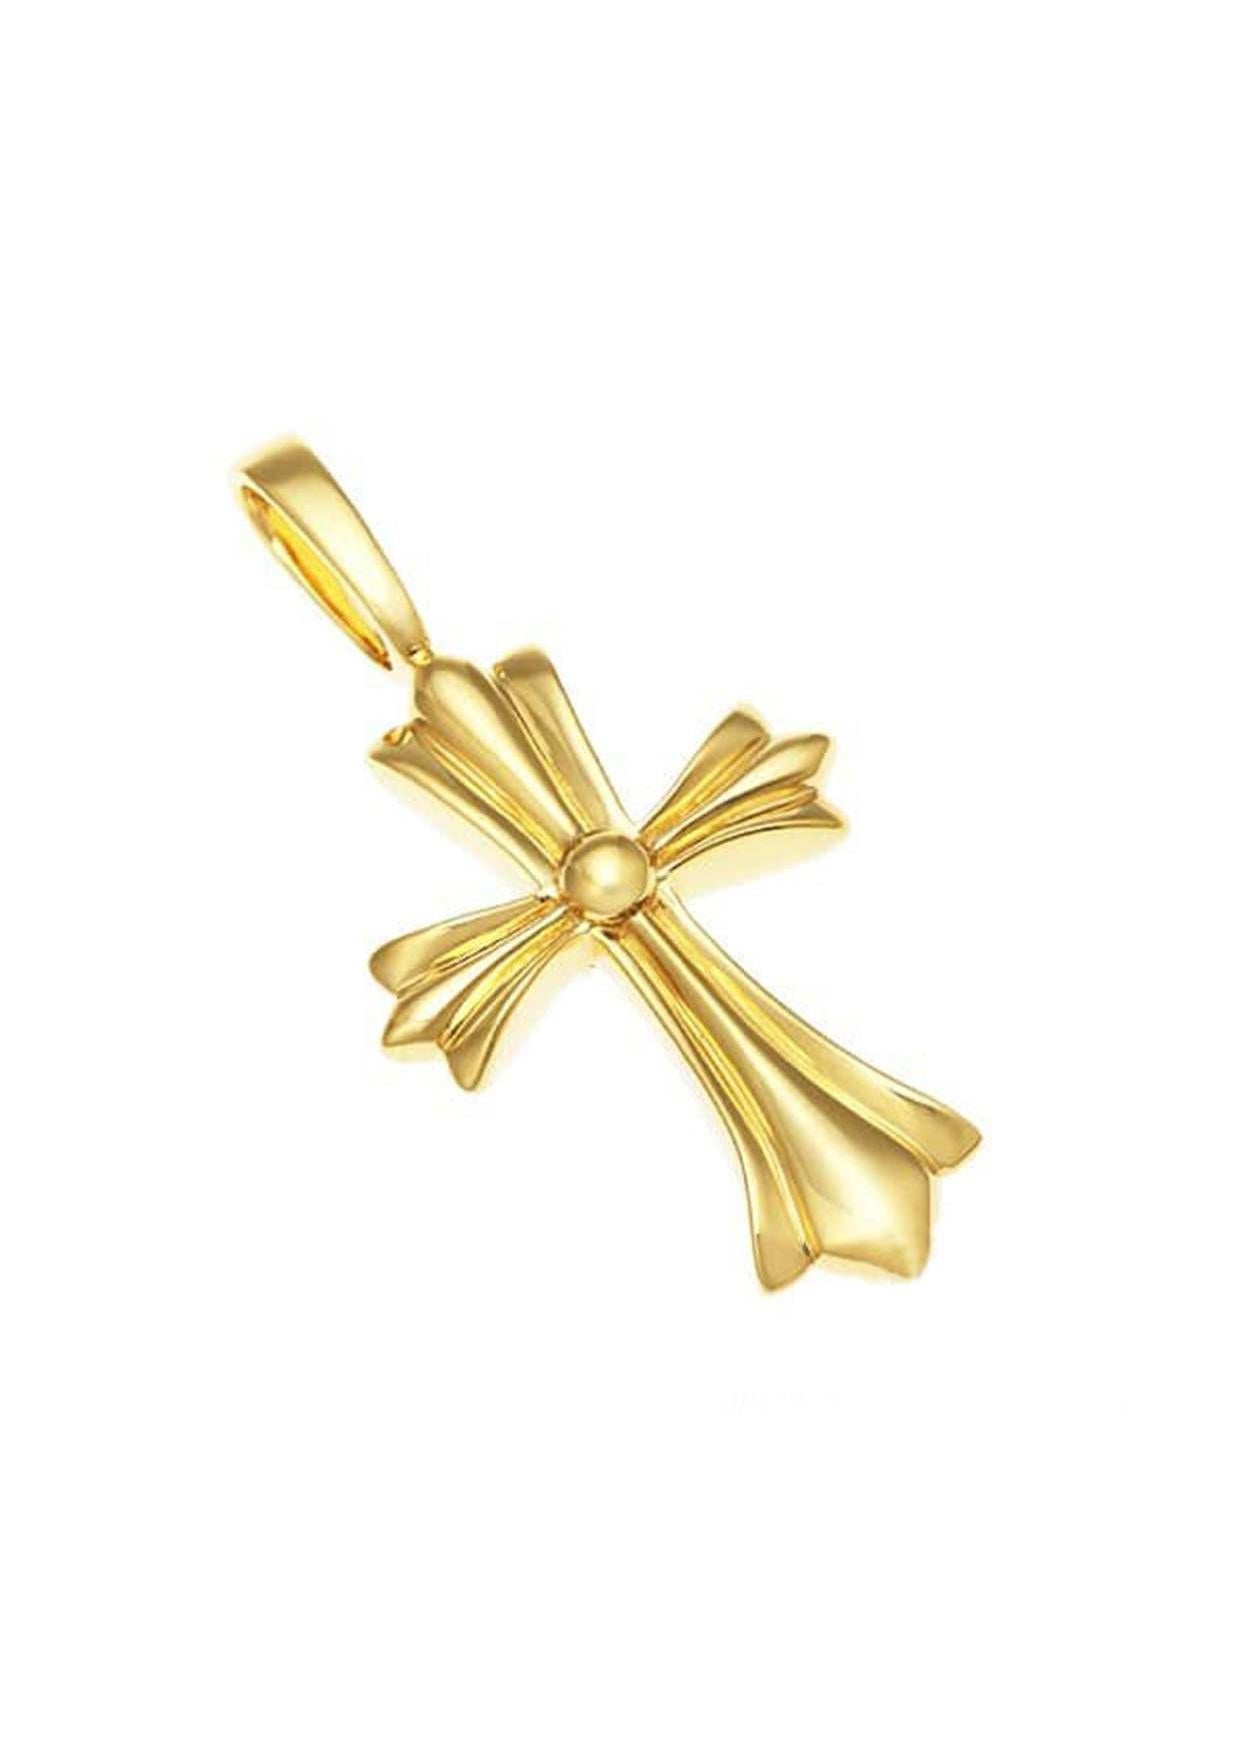 Enhance your jewelry collection with this exquisite 18K yellow gold diamond cross pendant top. Crafted with precision, this pendant features a stunning 0.43 carat diamond set in a beautifully detailed cross design.

DETAILS:

* SKU: cin473
*